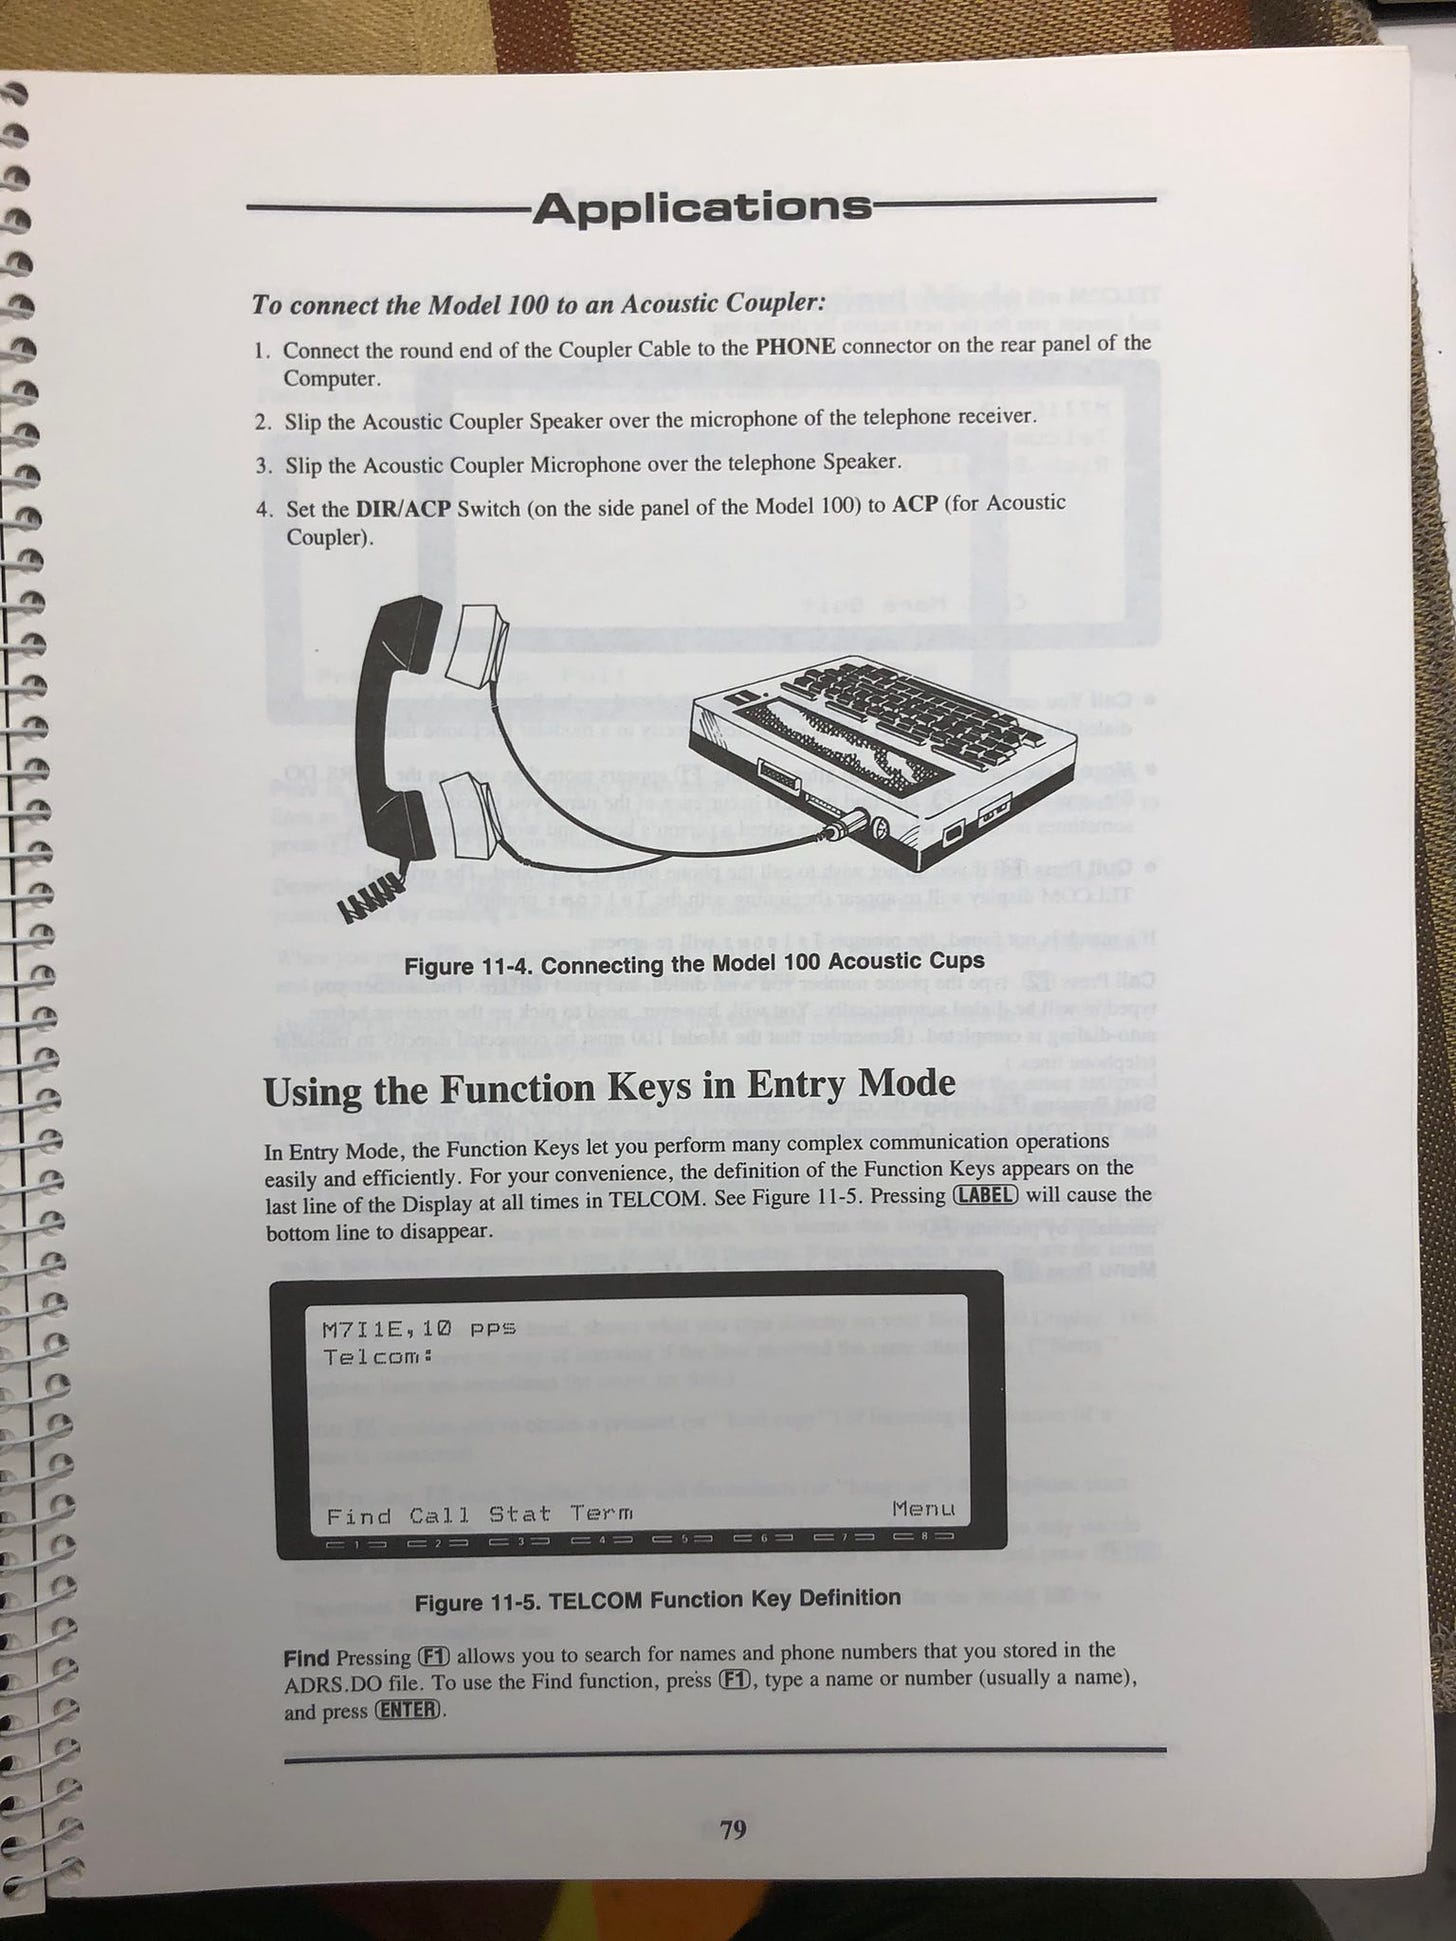 Applications page from the Model 100 manual, details connecting the portable computer to an acoustic coupler with illustrations